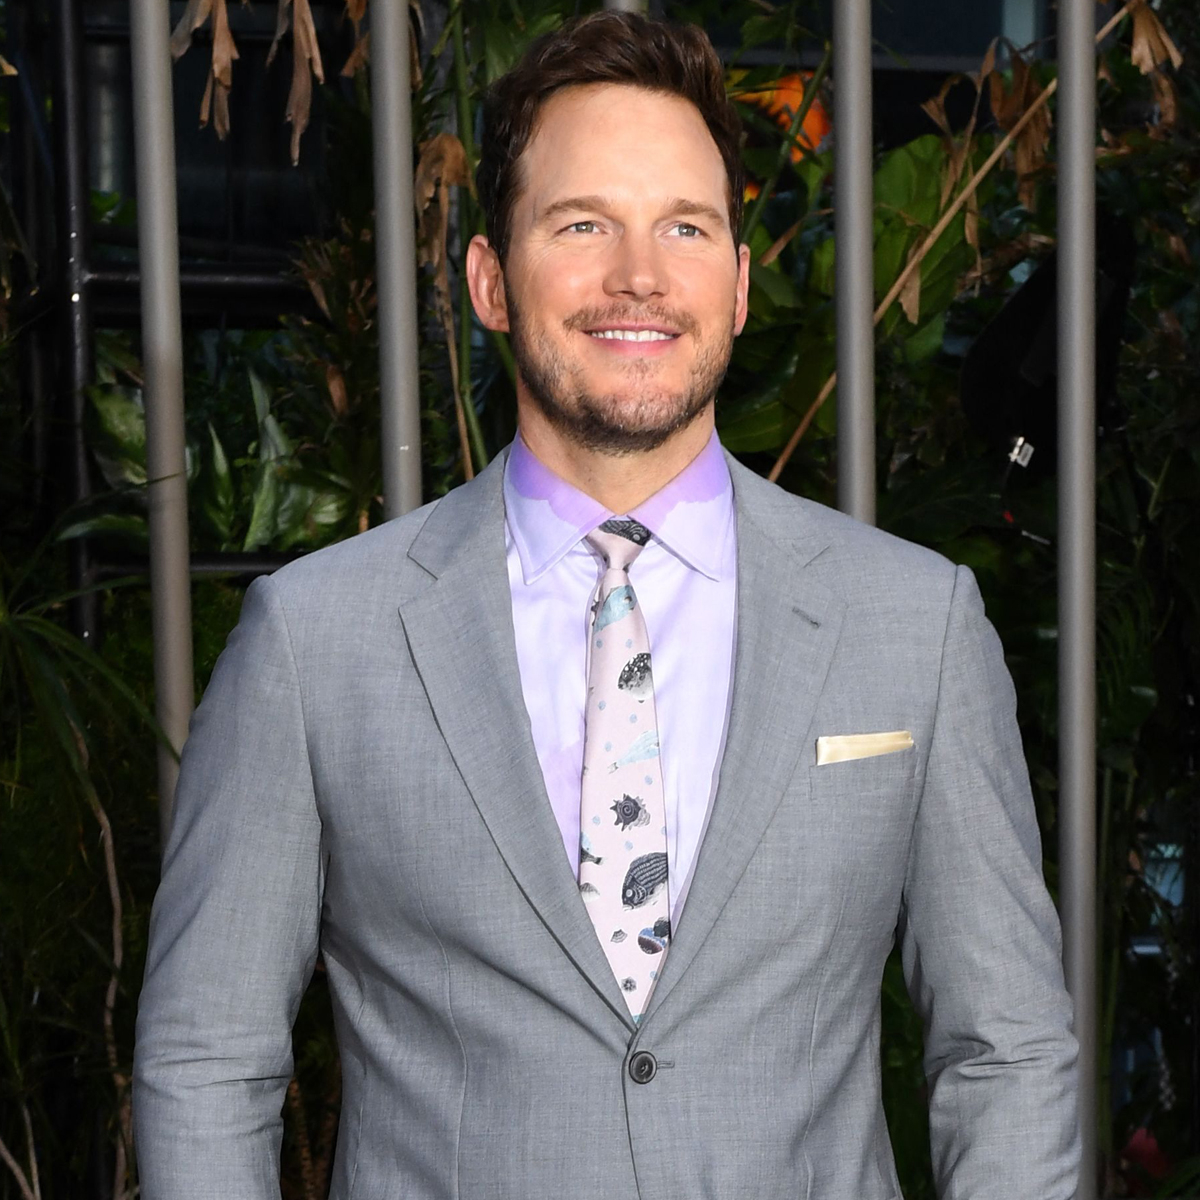 Chris Pratt Shares Sweet Glimpse Into His Life as a “Total Girl Dad” With Daughter Eloise